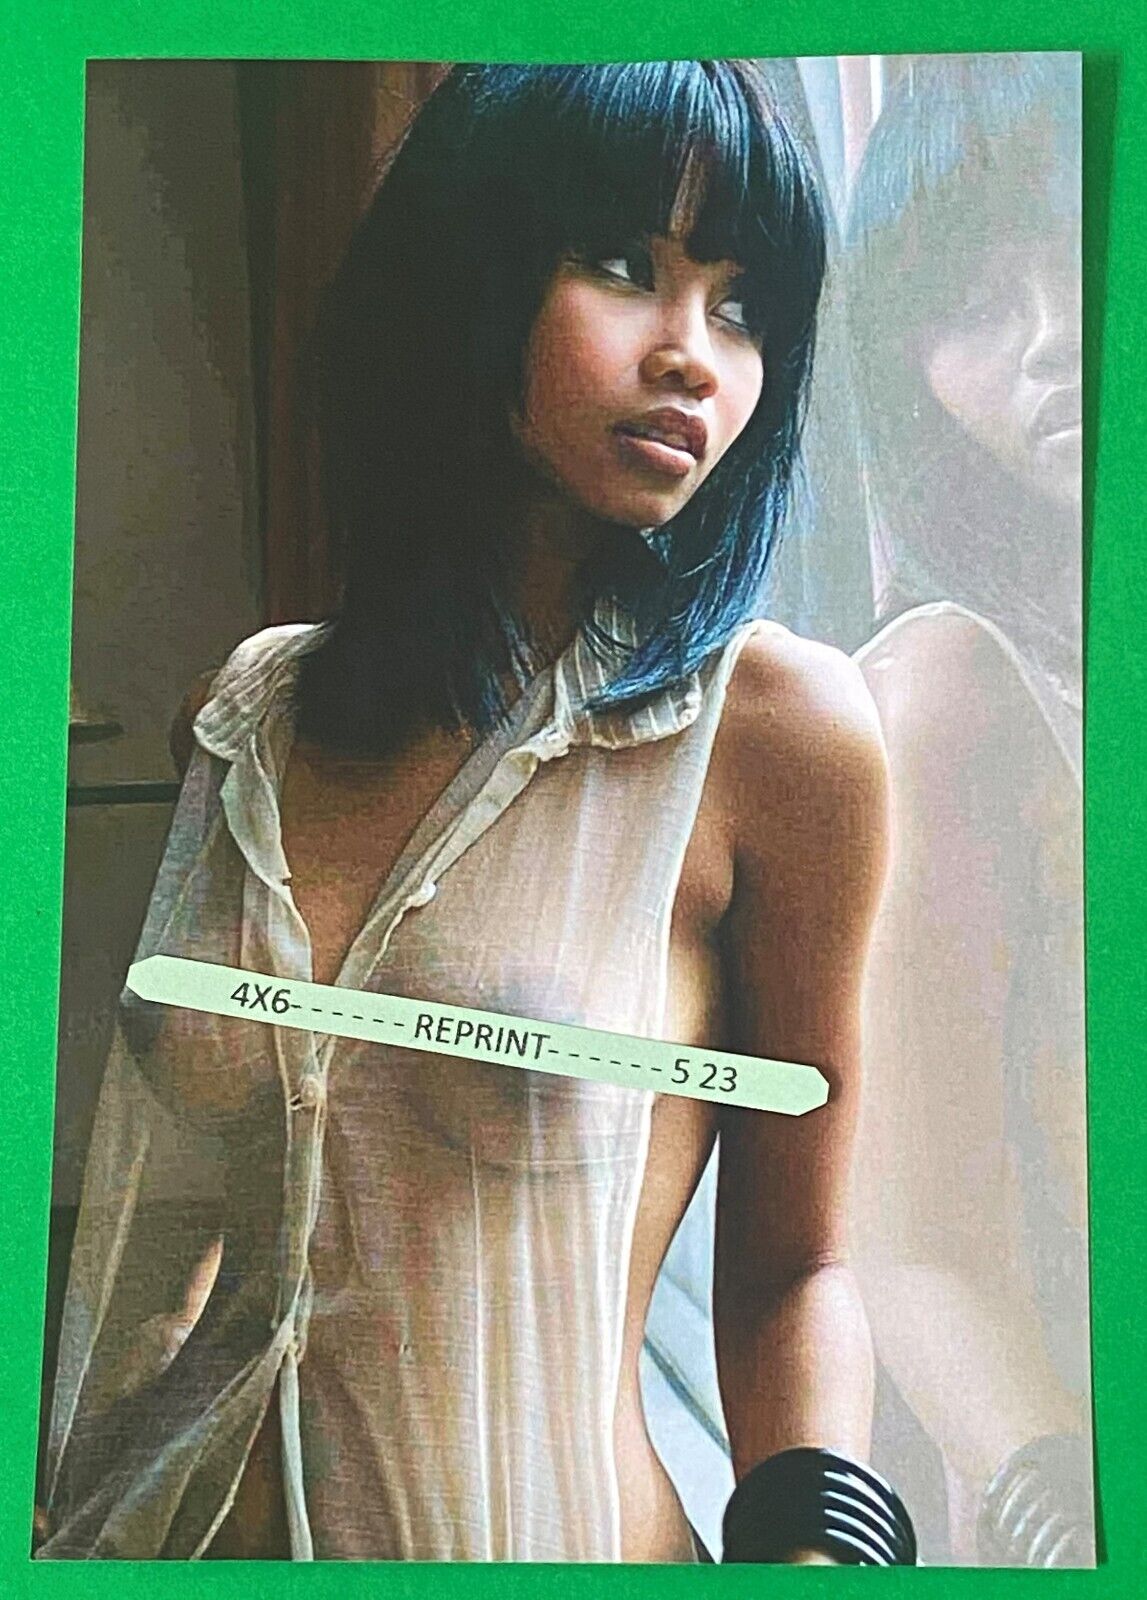 Found 4X6 PHOTO of Sexy Beautiful Asian African American Actor & Lingerie Model